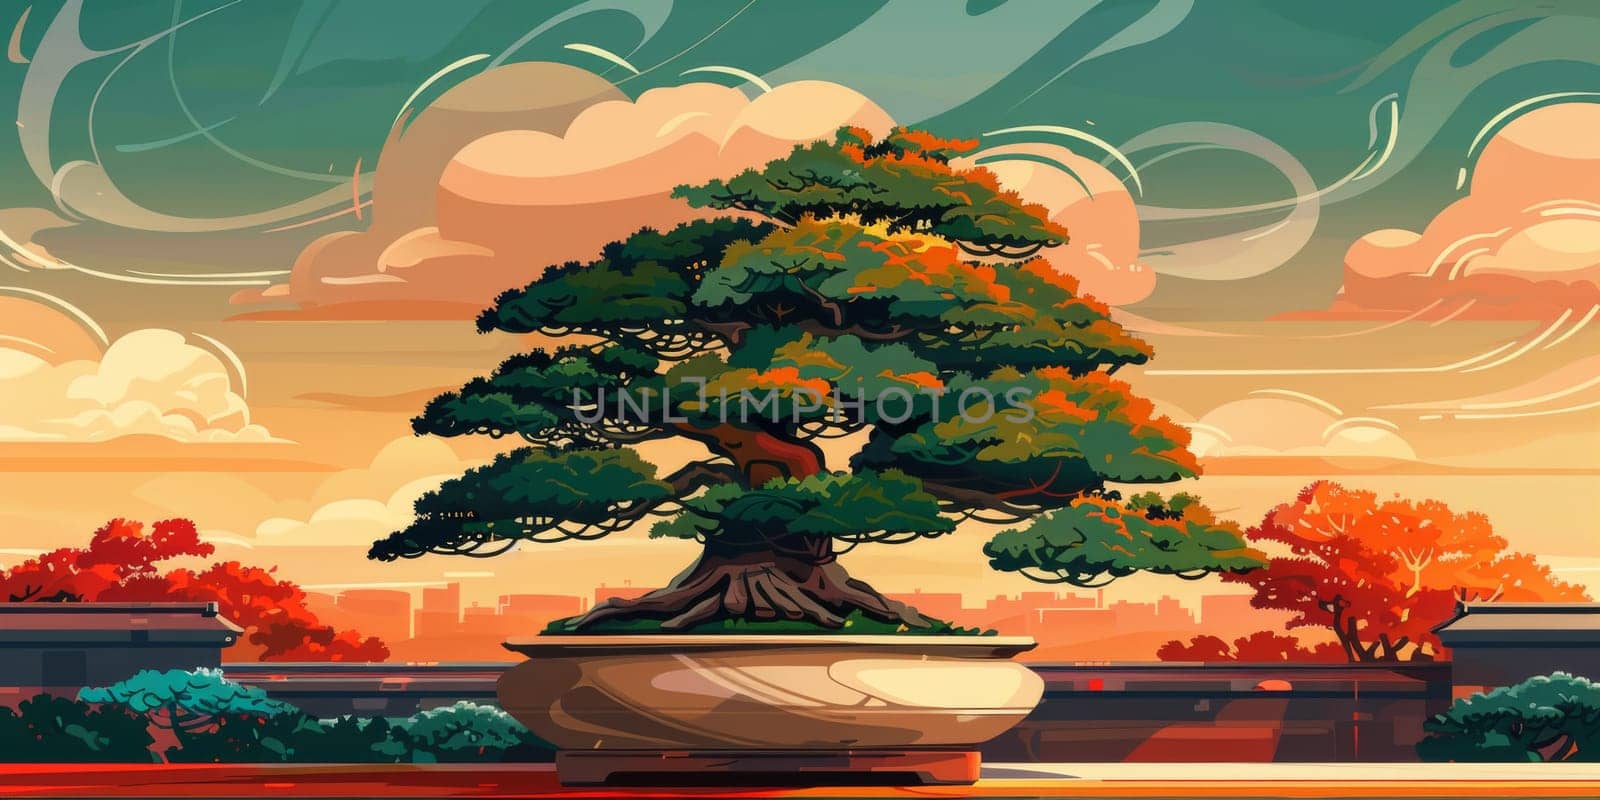 Bonsai in Japan style, ornamental tree or shrub grown in a pot and artificially prevented from reaching its normal size by Kadula